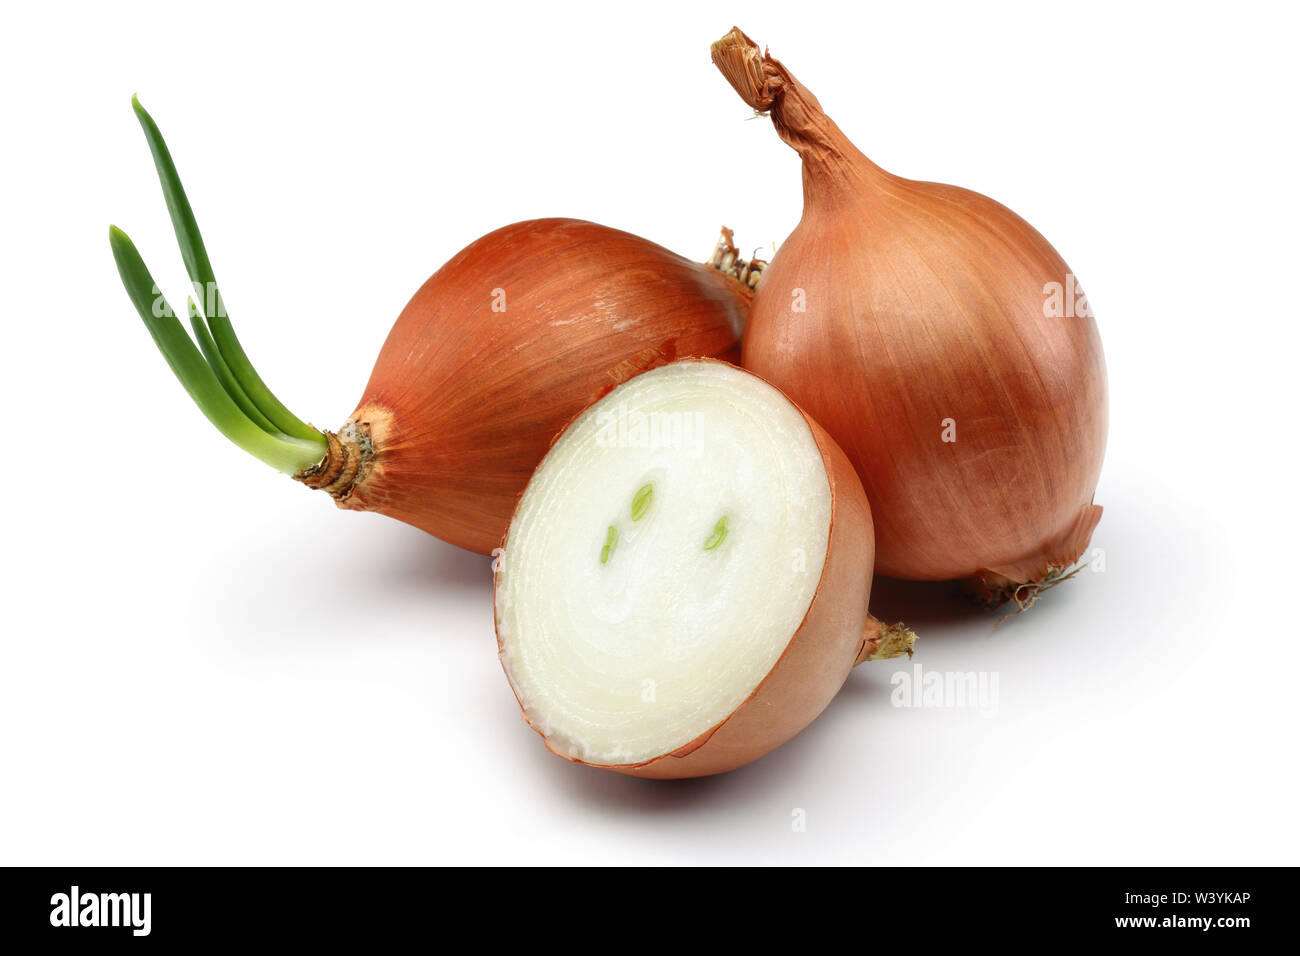 Whole and half onions isolated on background Stock Photo